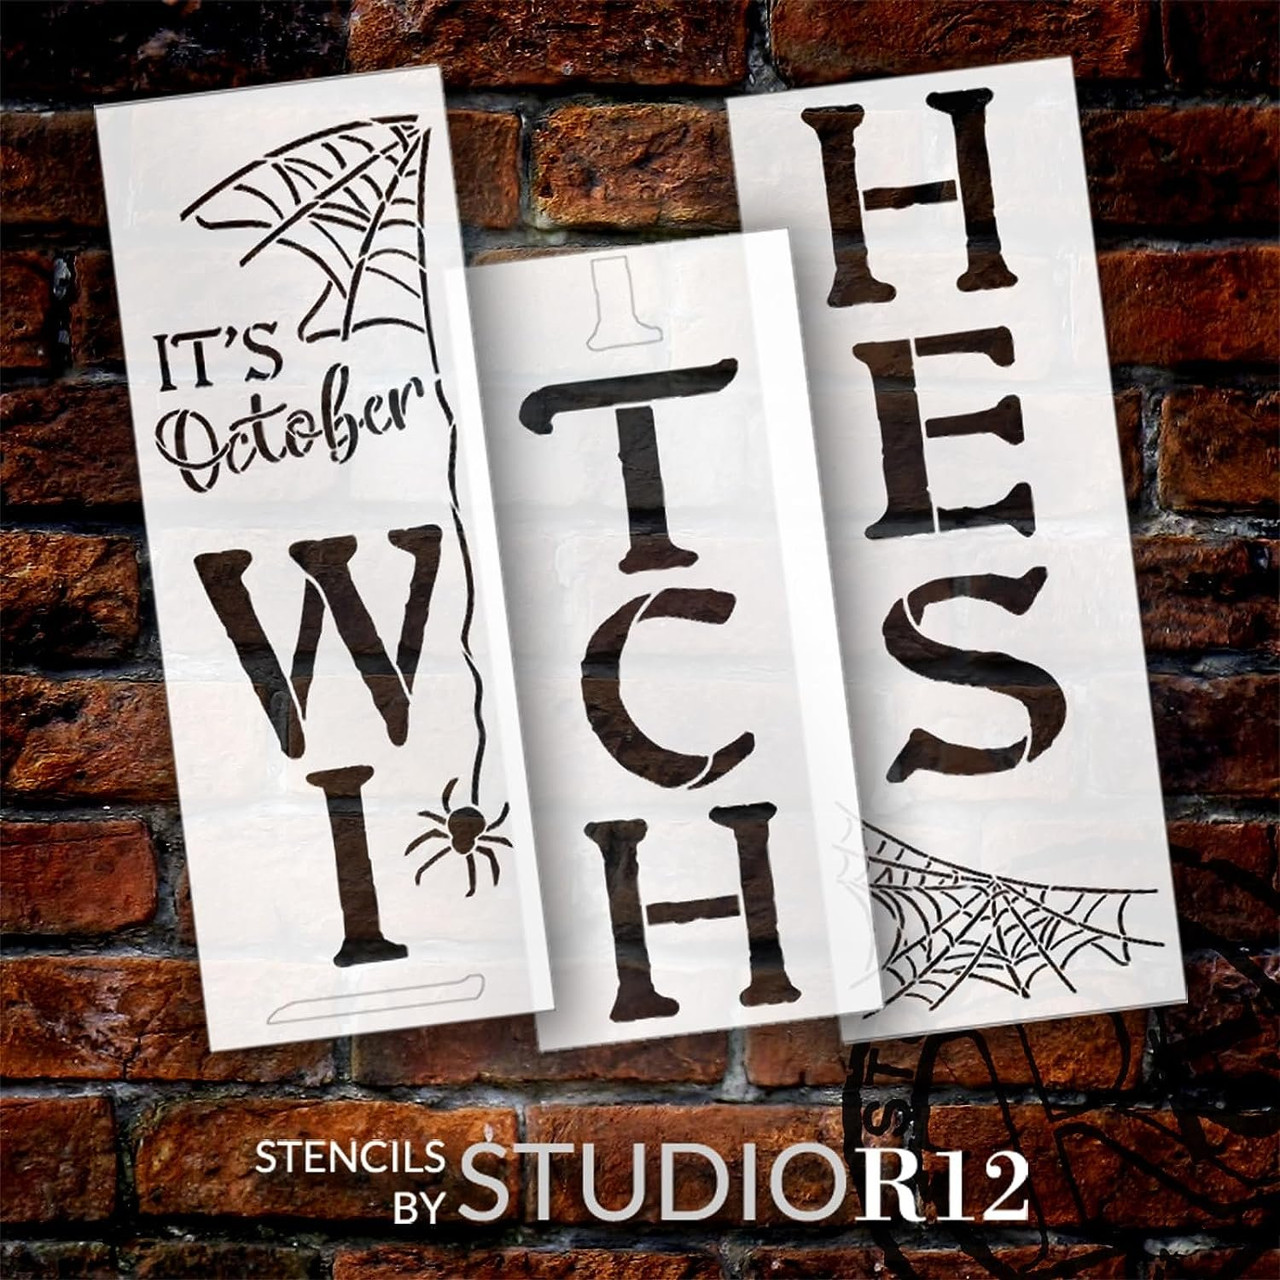 It's October Witches Tall Porch Sign Stencil with Spider Webs by StudioR12 - Select Size - USA Made - DIY Halloween Front Door Vertical Leaner Decor - STCL7068